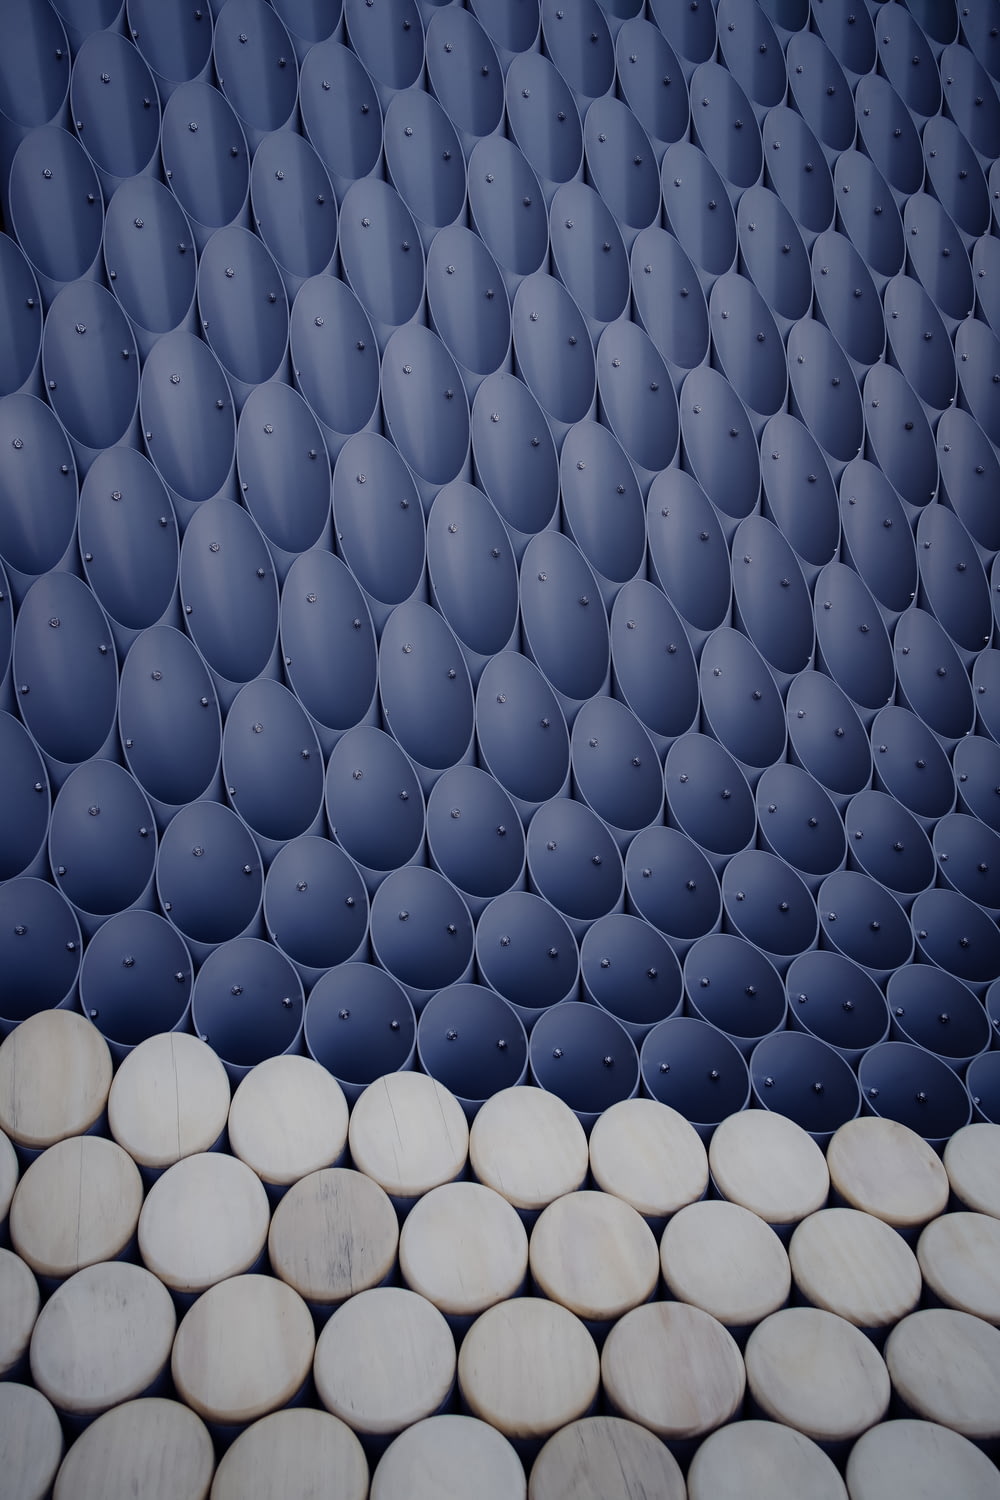 a wall made out of many round objects